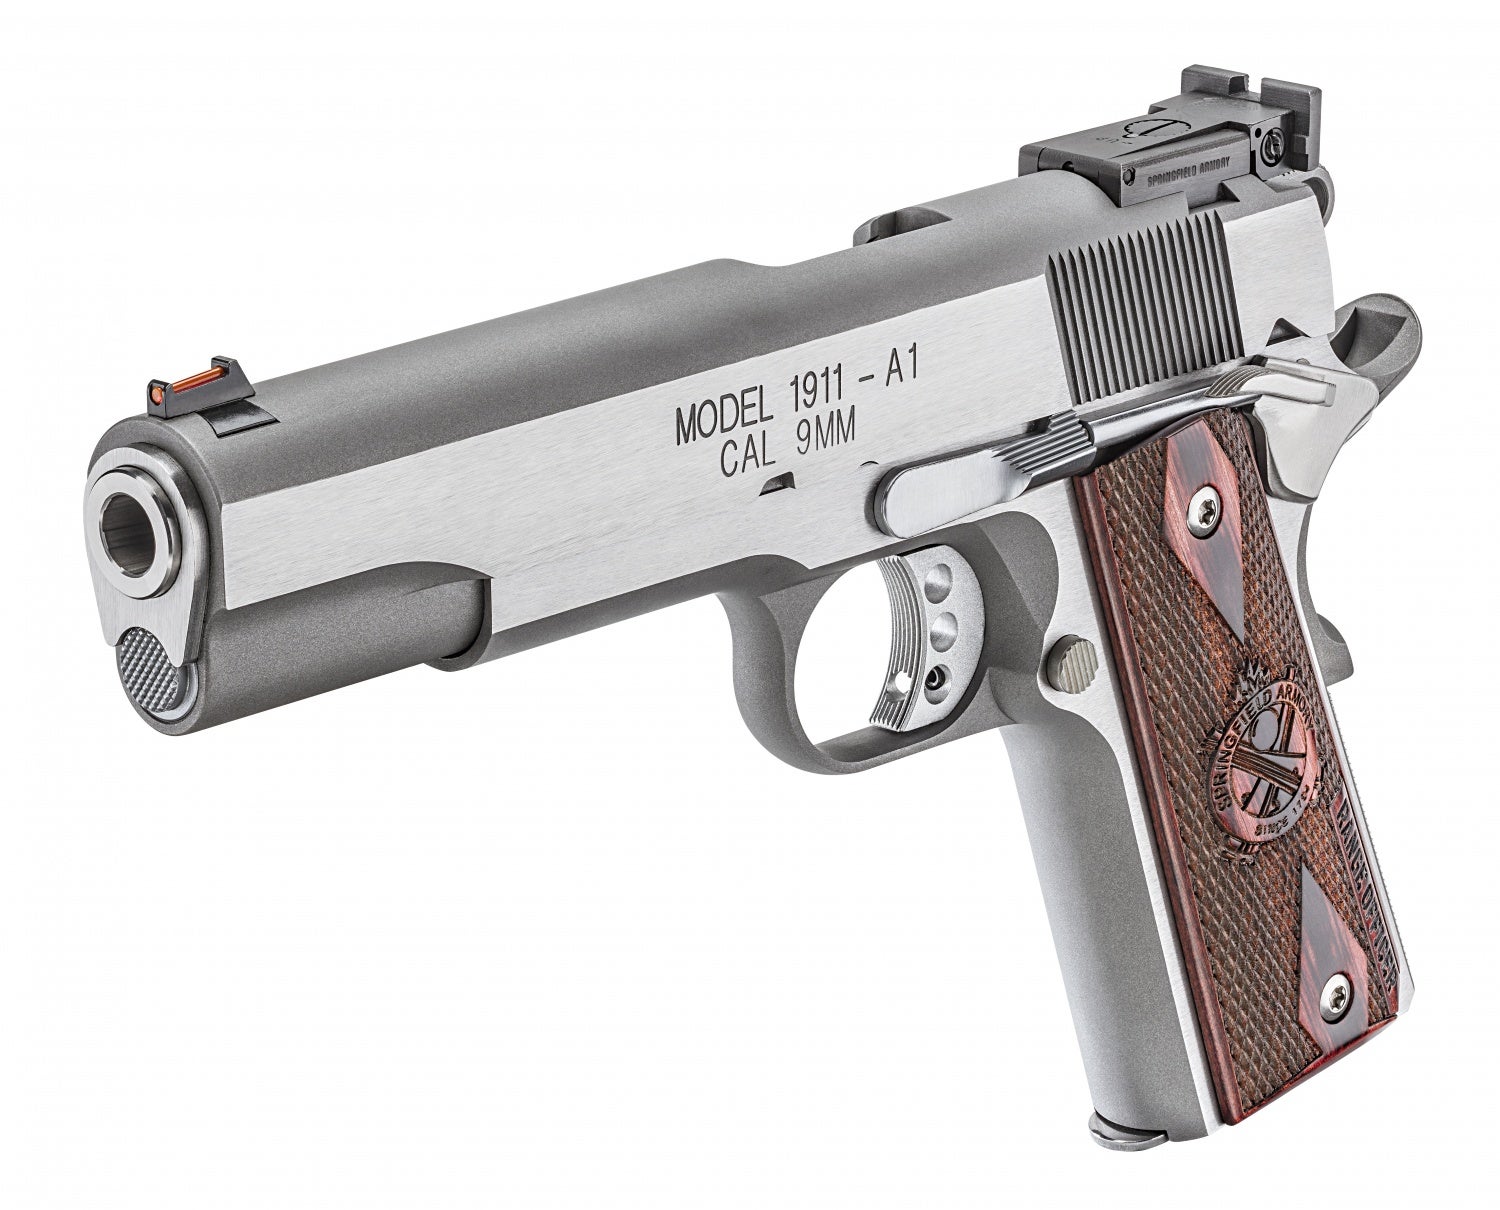 TFBTV SHOT Show Preview Hands on with the New Springfield Stainless Range Officer 1911 The